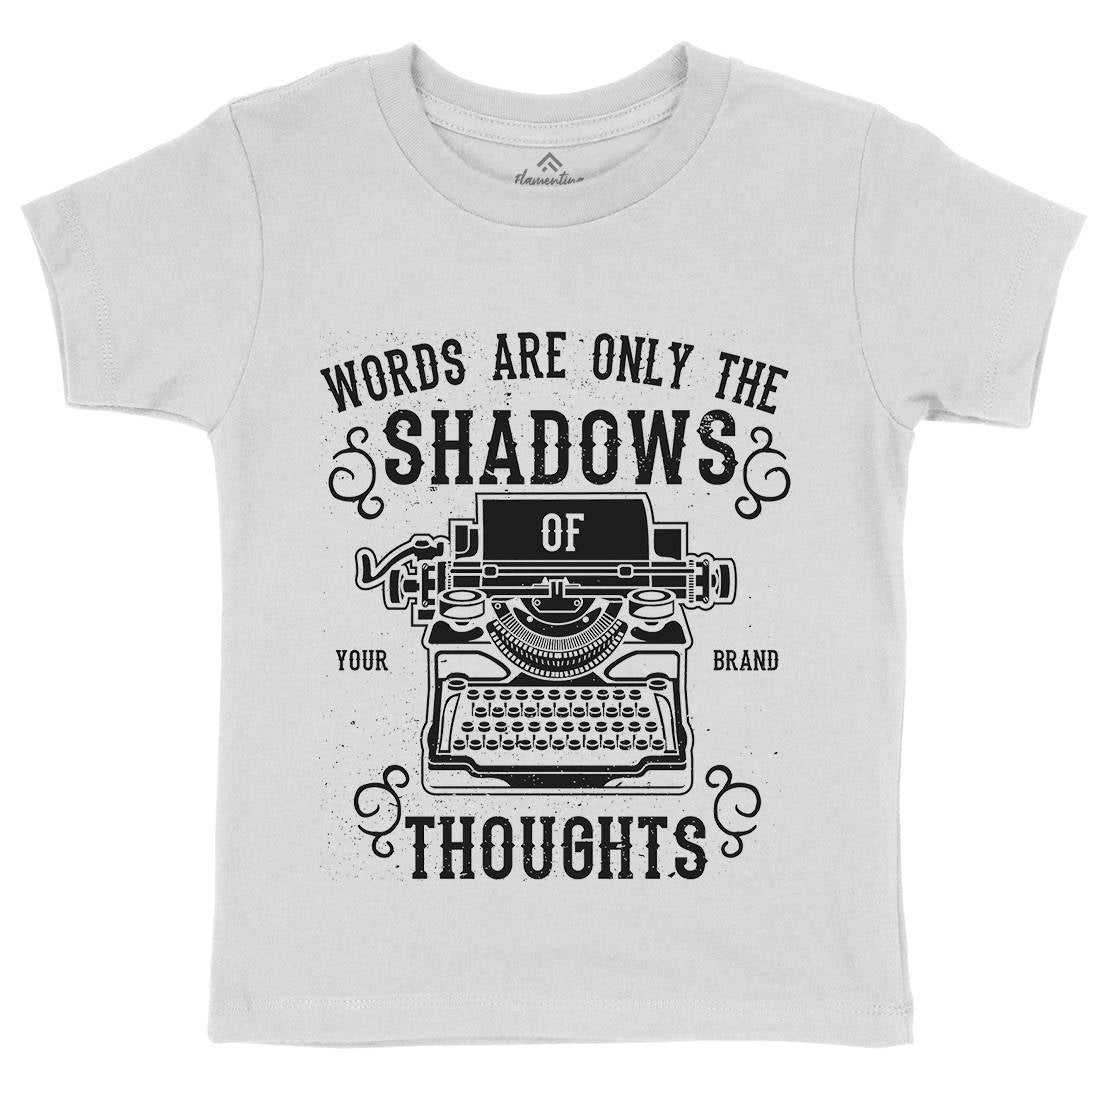 Shadows Of Thoughts Kids Crew Neck T-Shirt Media A139